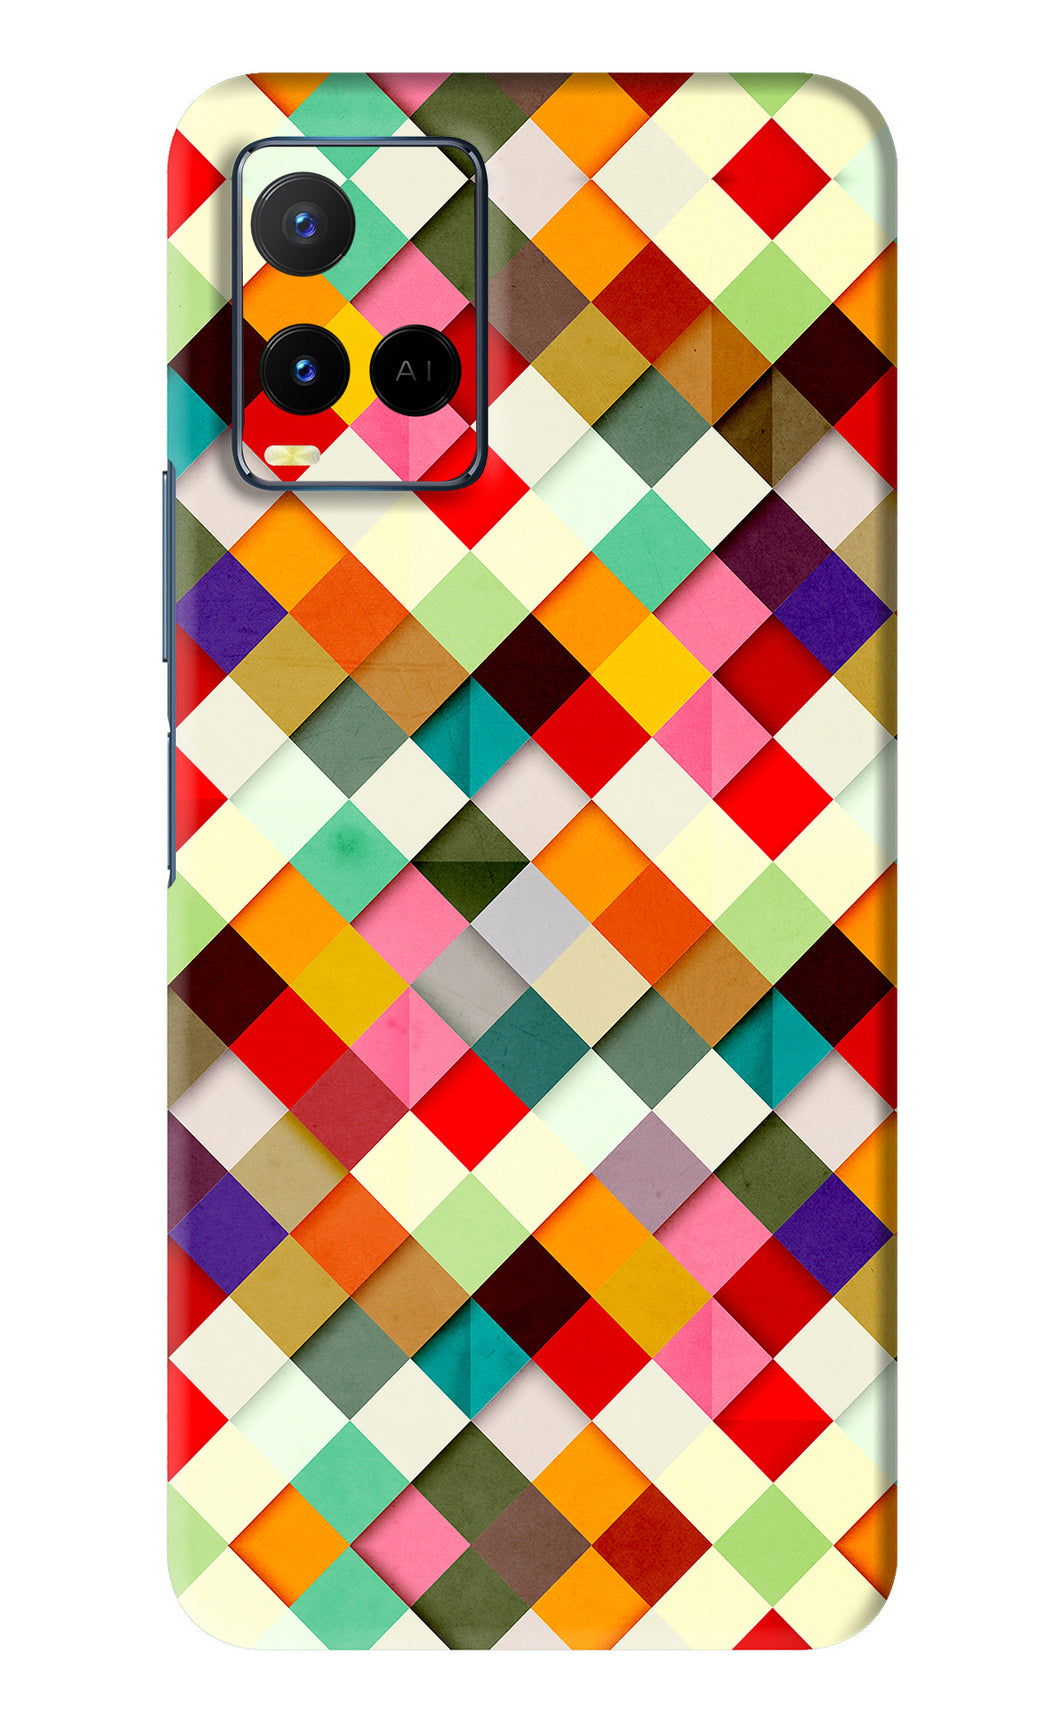 Geometric Abstract Colorful Vivo Y21 Back Skin Wrap